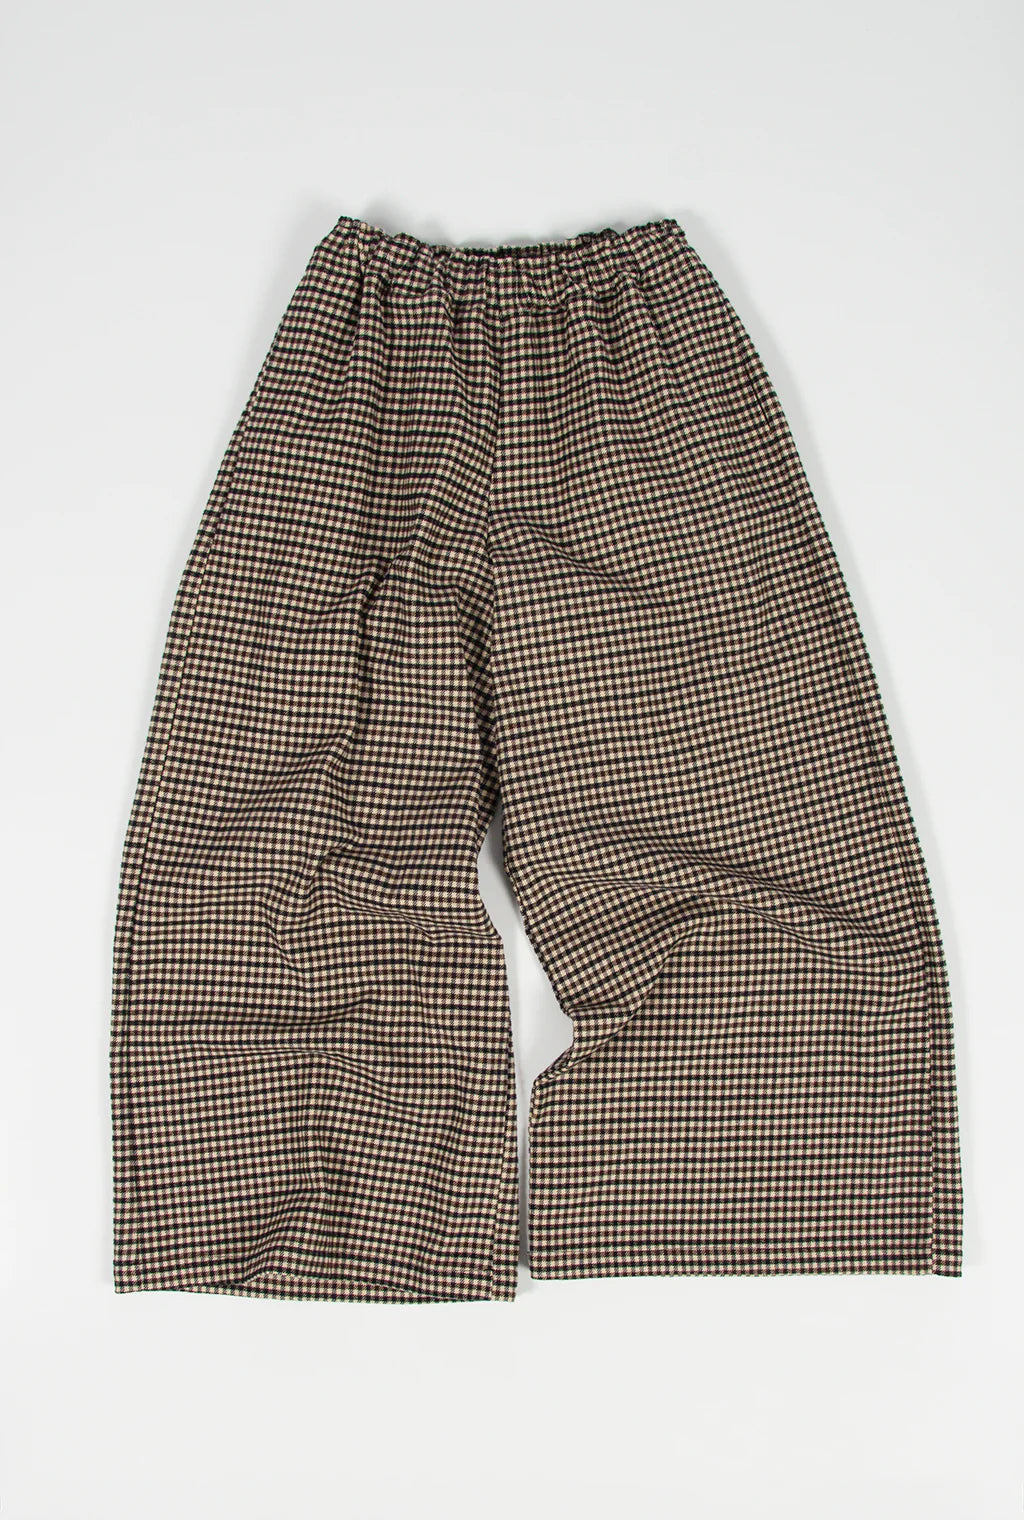 Tangerine - oversized check trousers